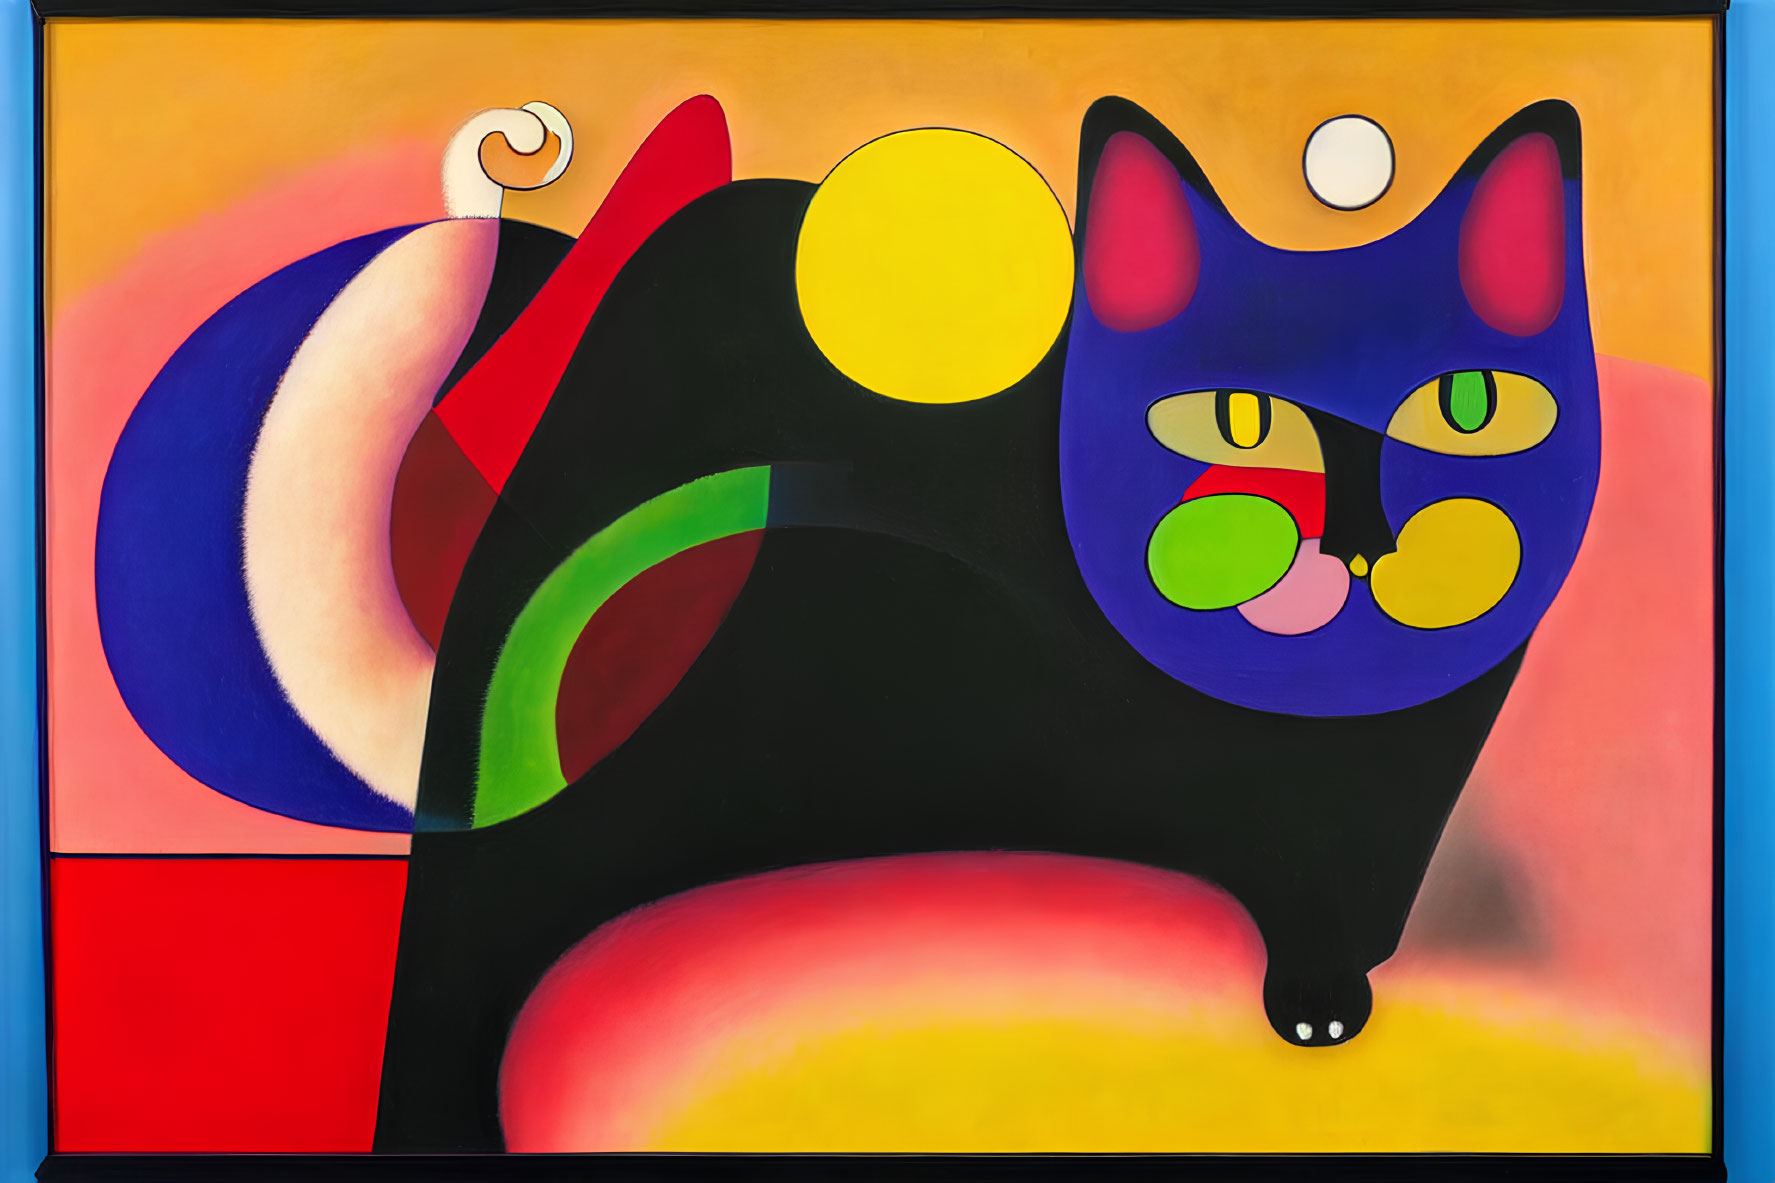 Abstract Black Cat Artwork with Vibrant Geometric Shapes